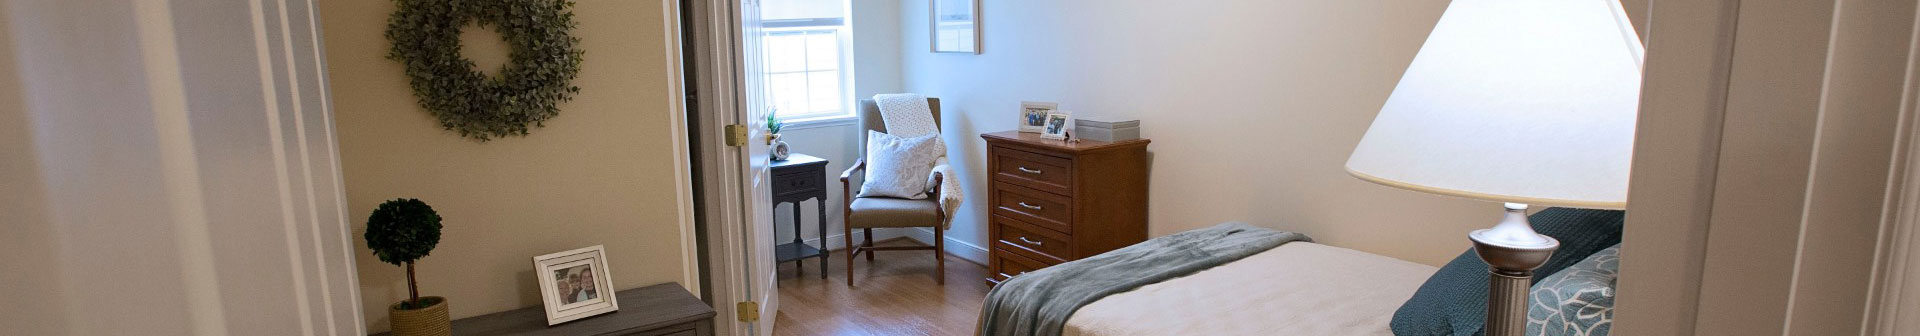 cropped image of a memory care suite at Artis of West Shore